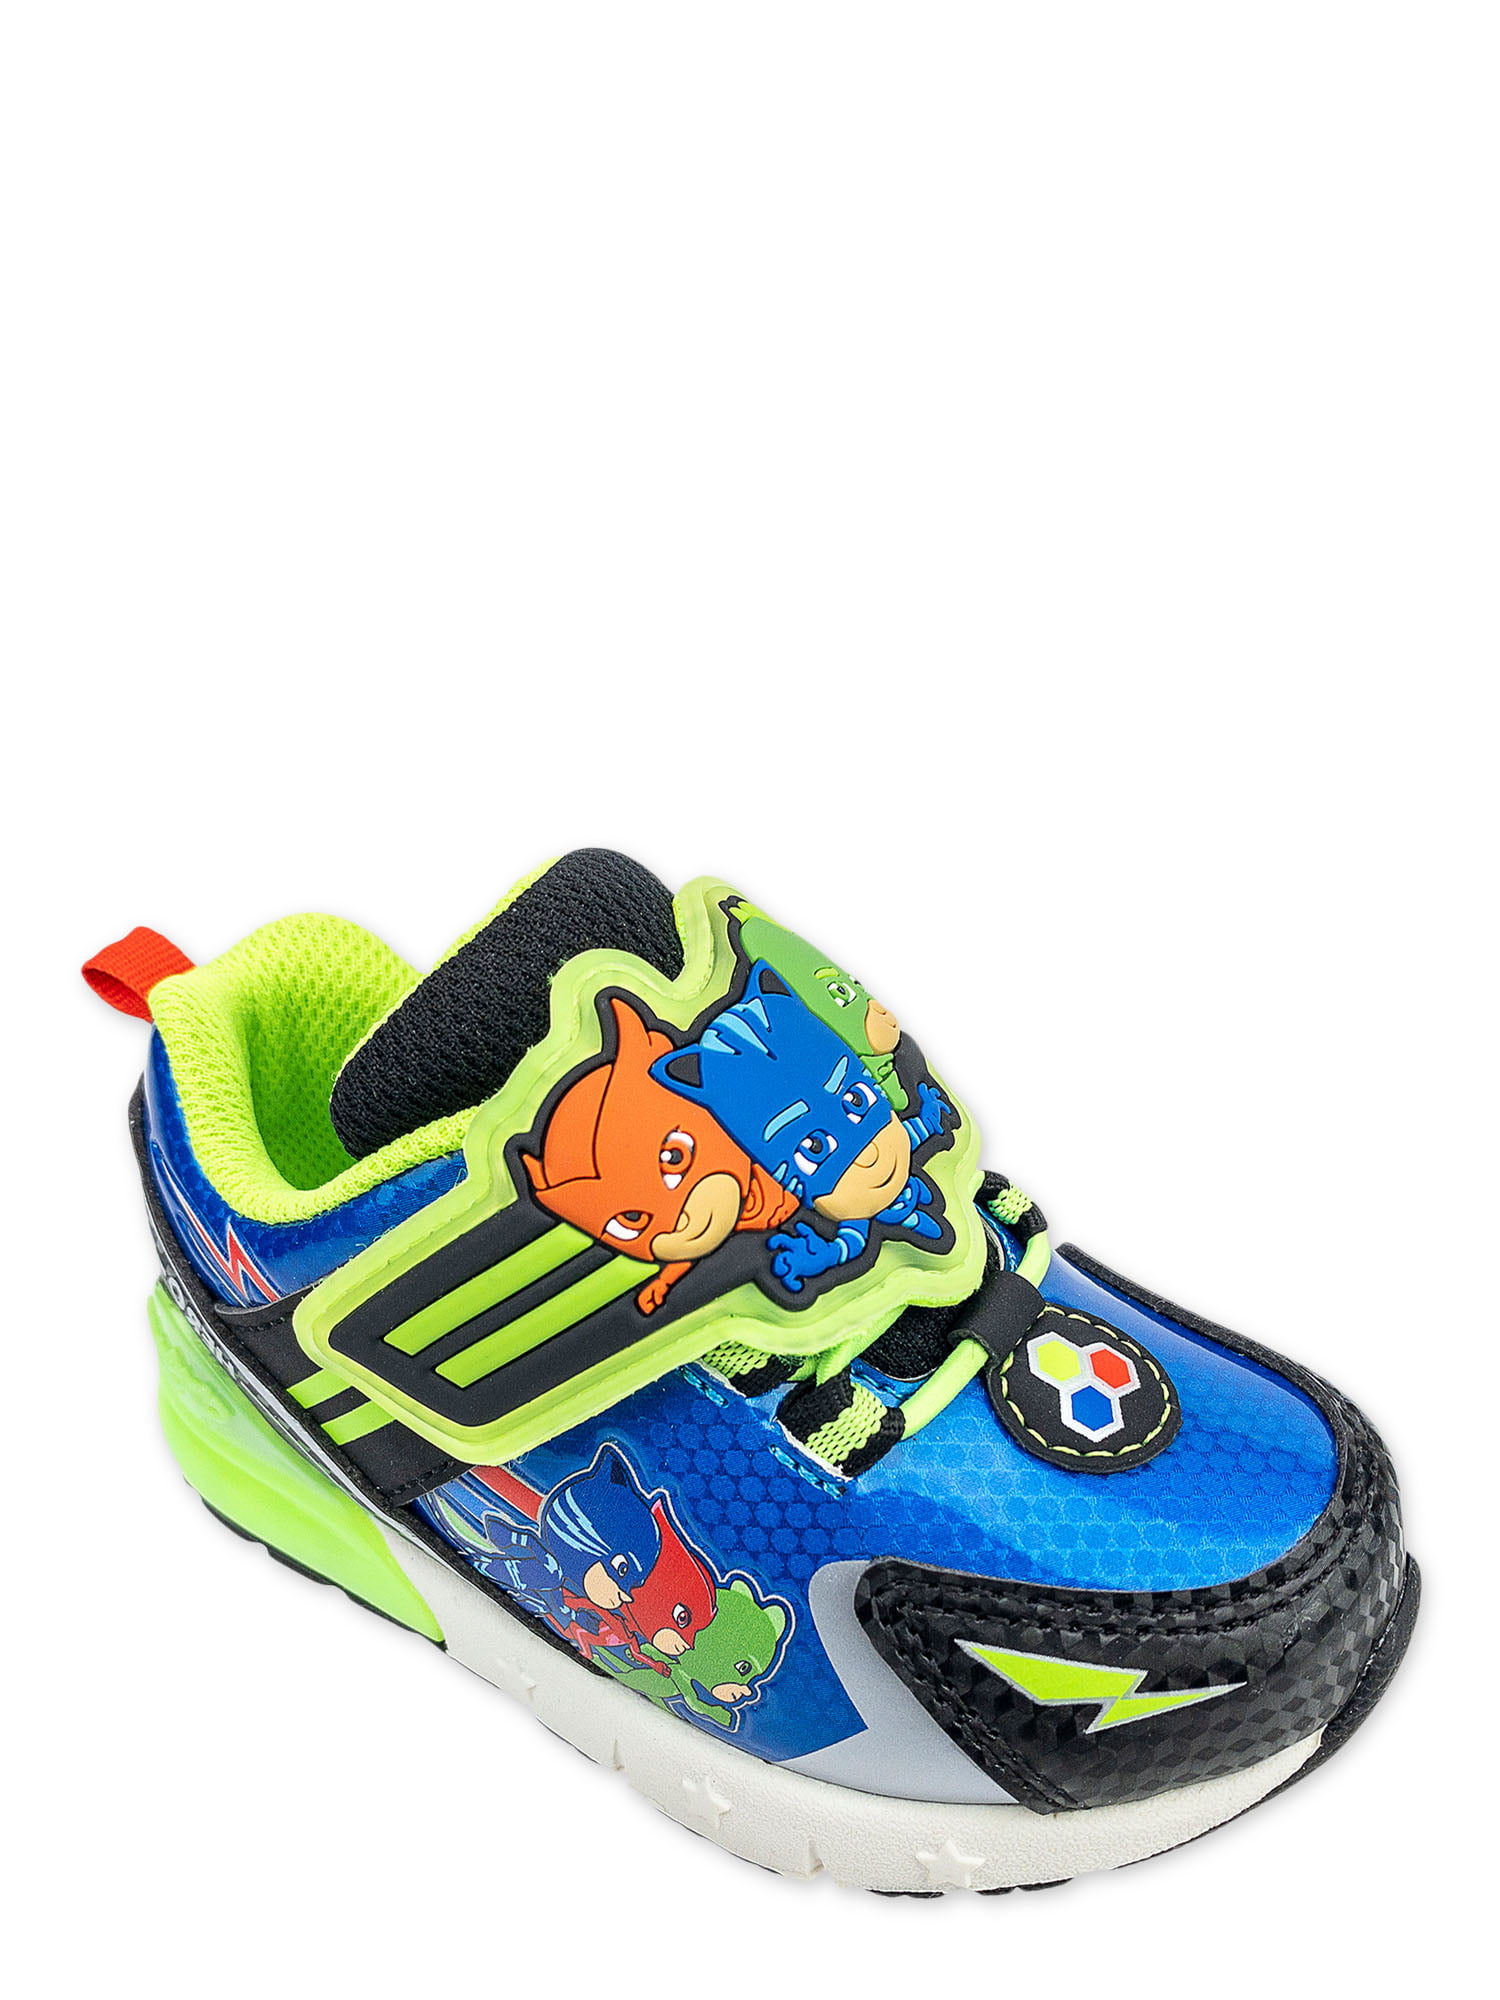 P J Masks Blue & Red Hi-Top Wipe Clean Trainers Sports Shoes Sizes 6-11.5 Child 